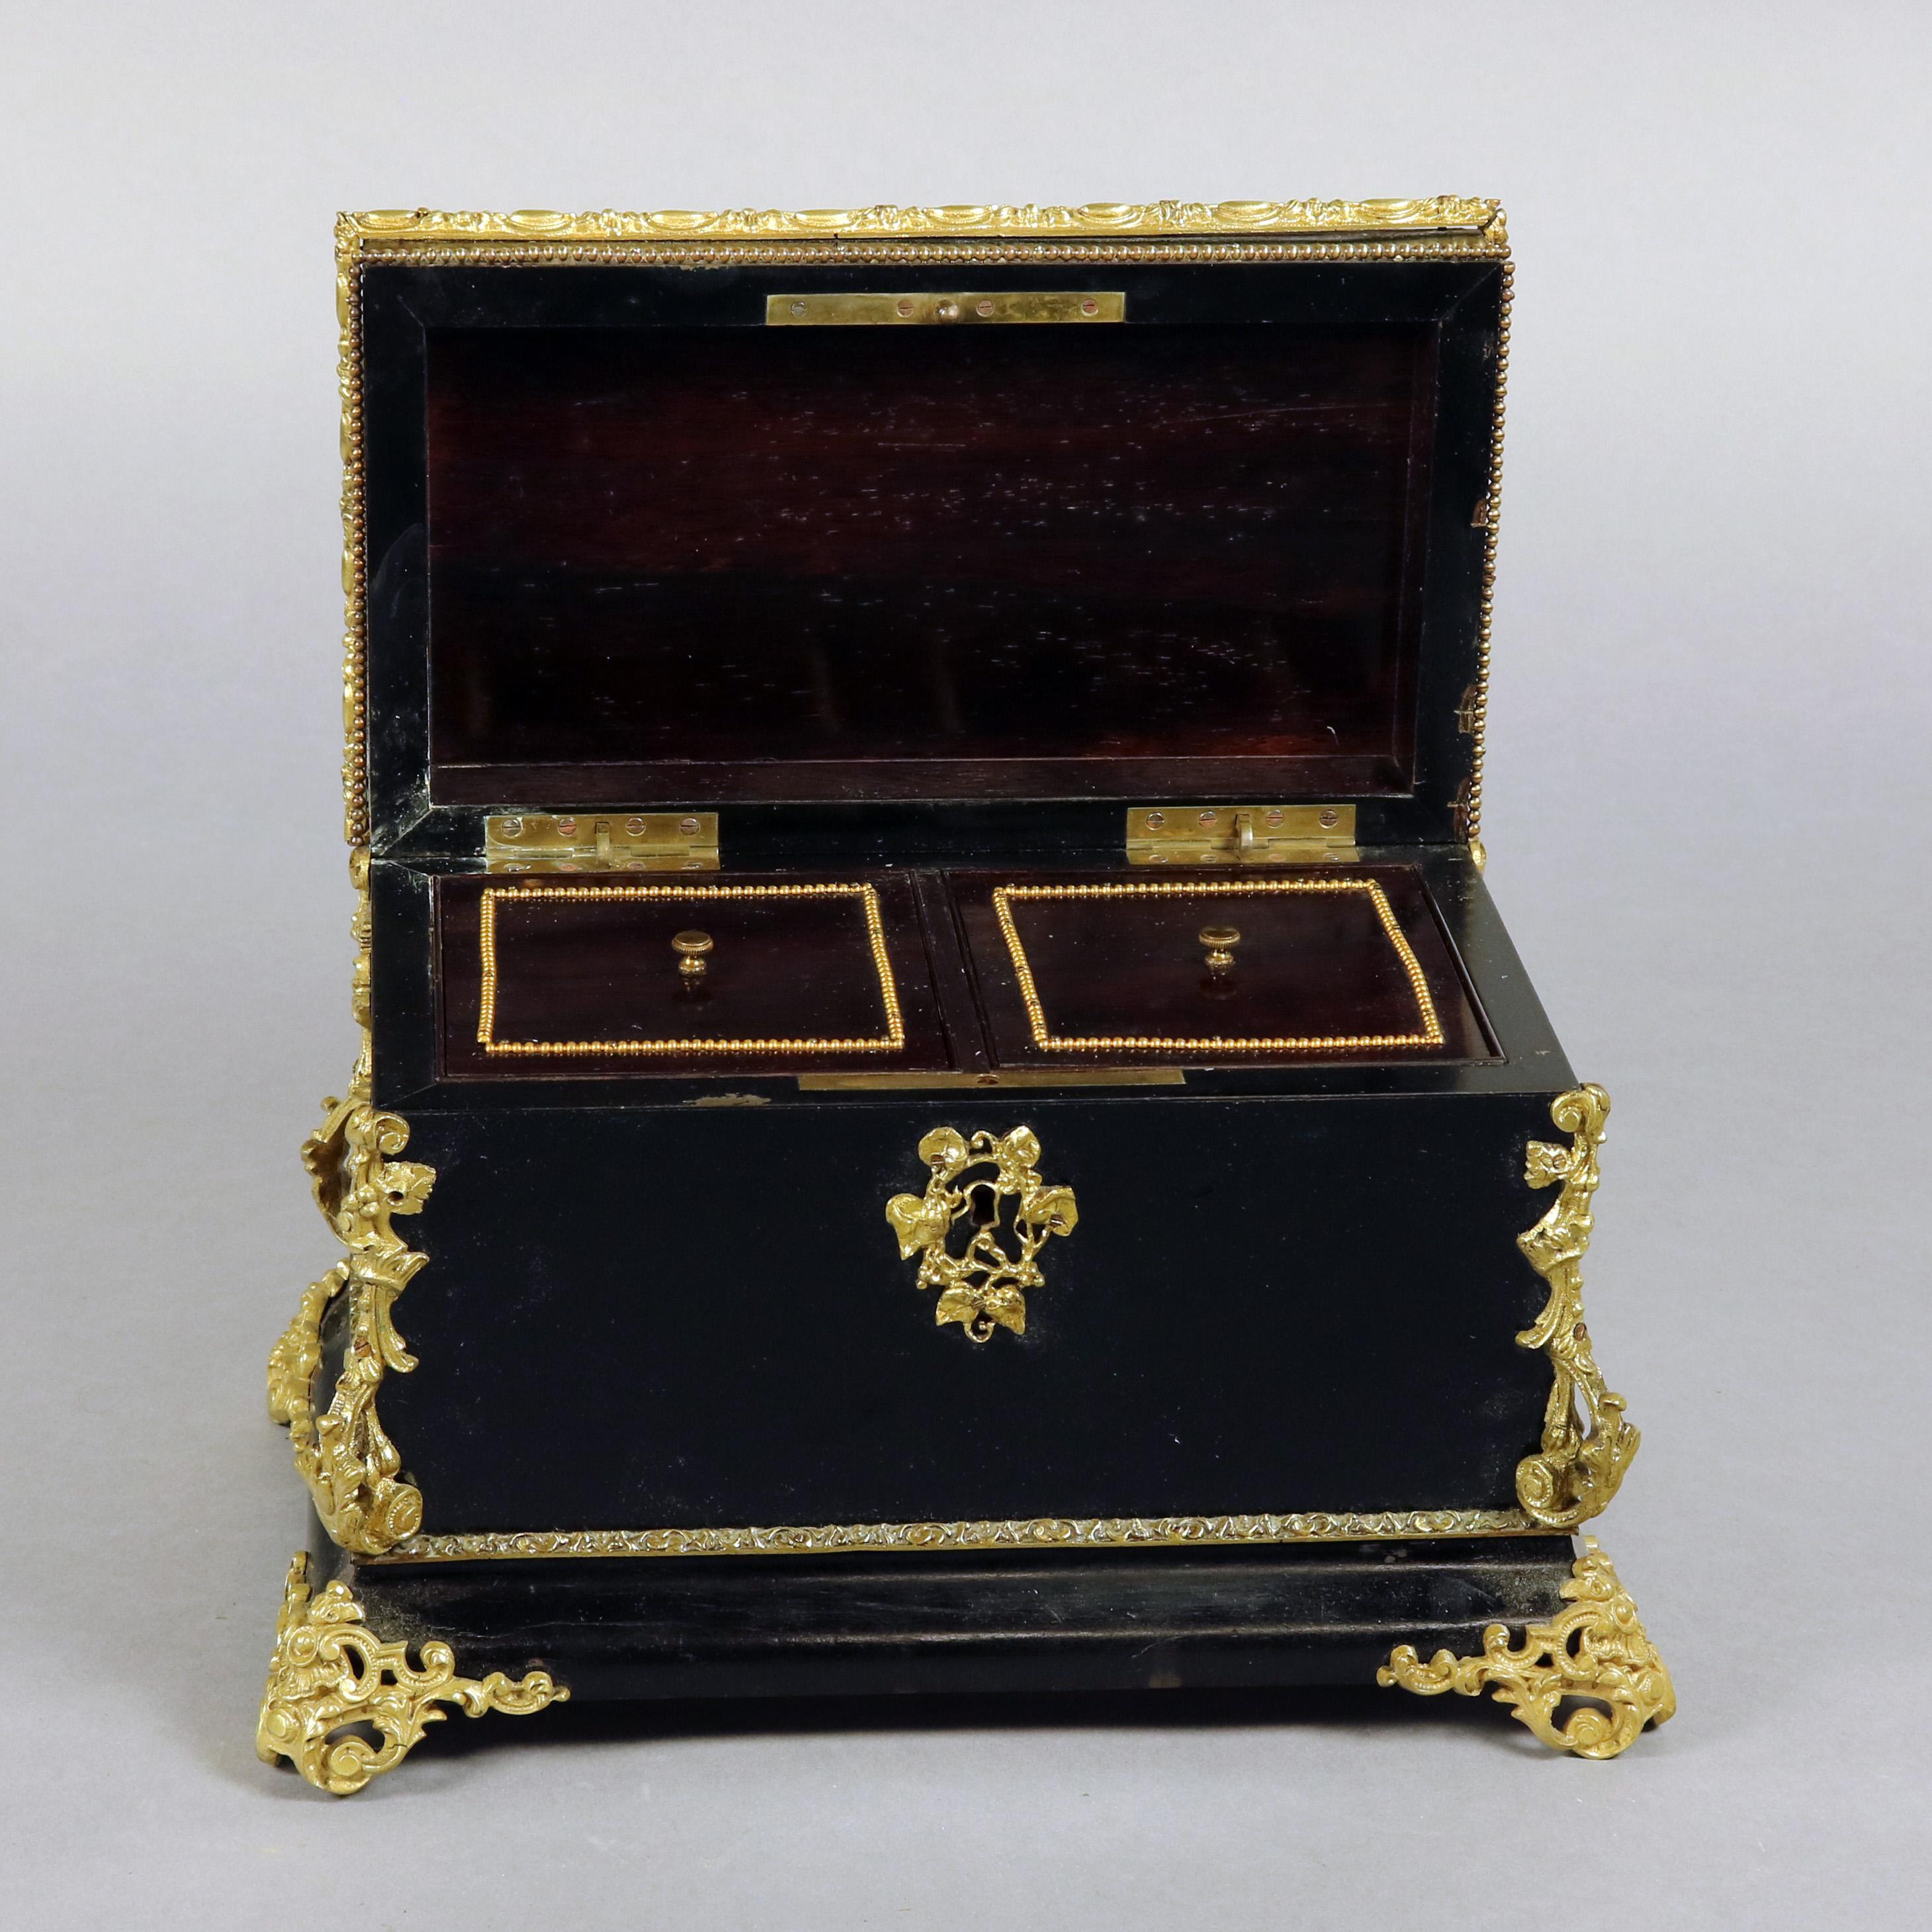 An antique French Louis XIV style tea caddy features ebonized cabinet having hinged and locking lid with central Sevres School hand painted floral porcelain reserved and foliate form cast ormolu mounts, escutcheon and feet, interior with two tin